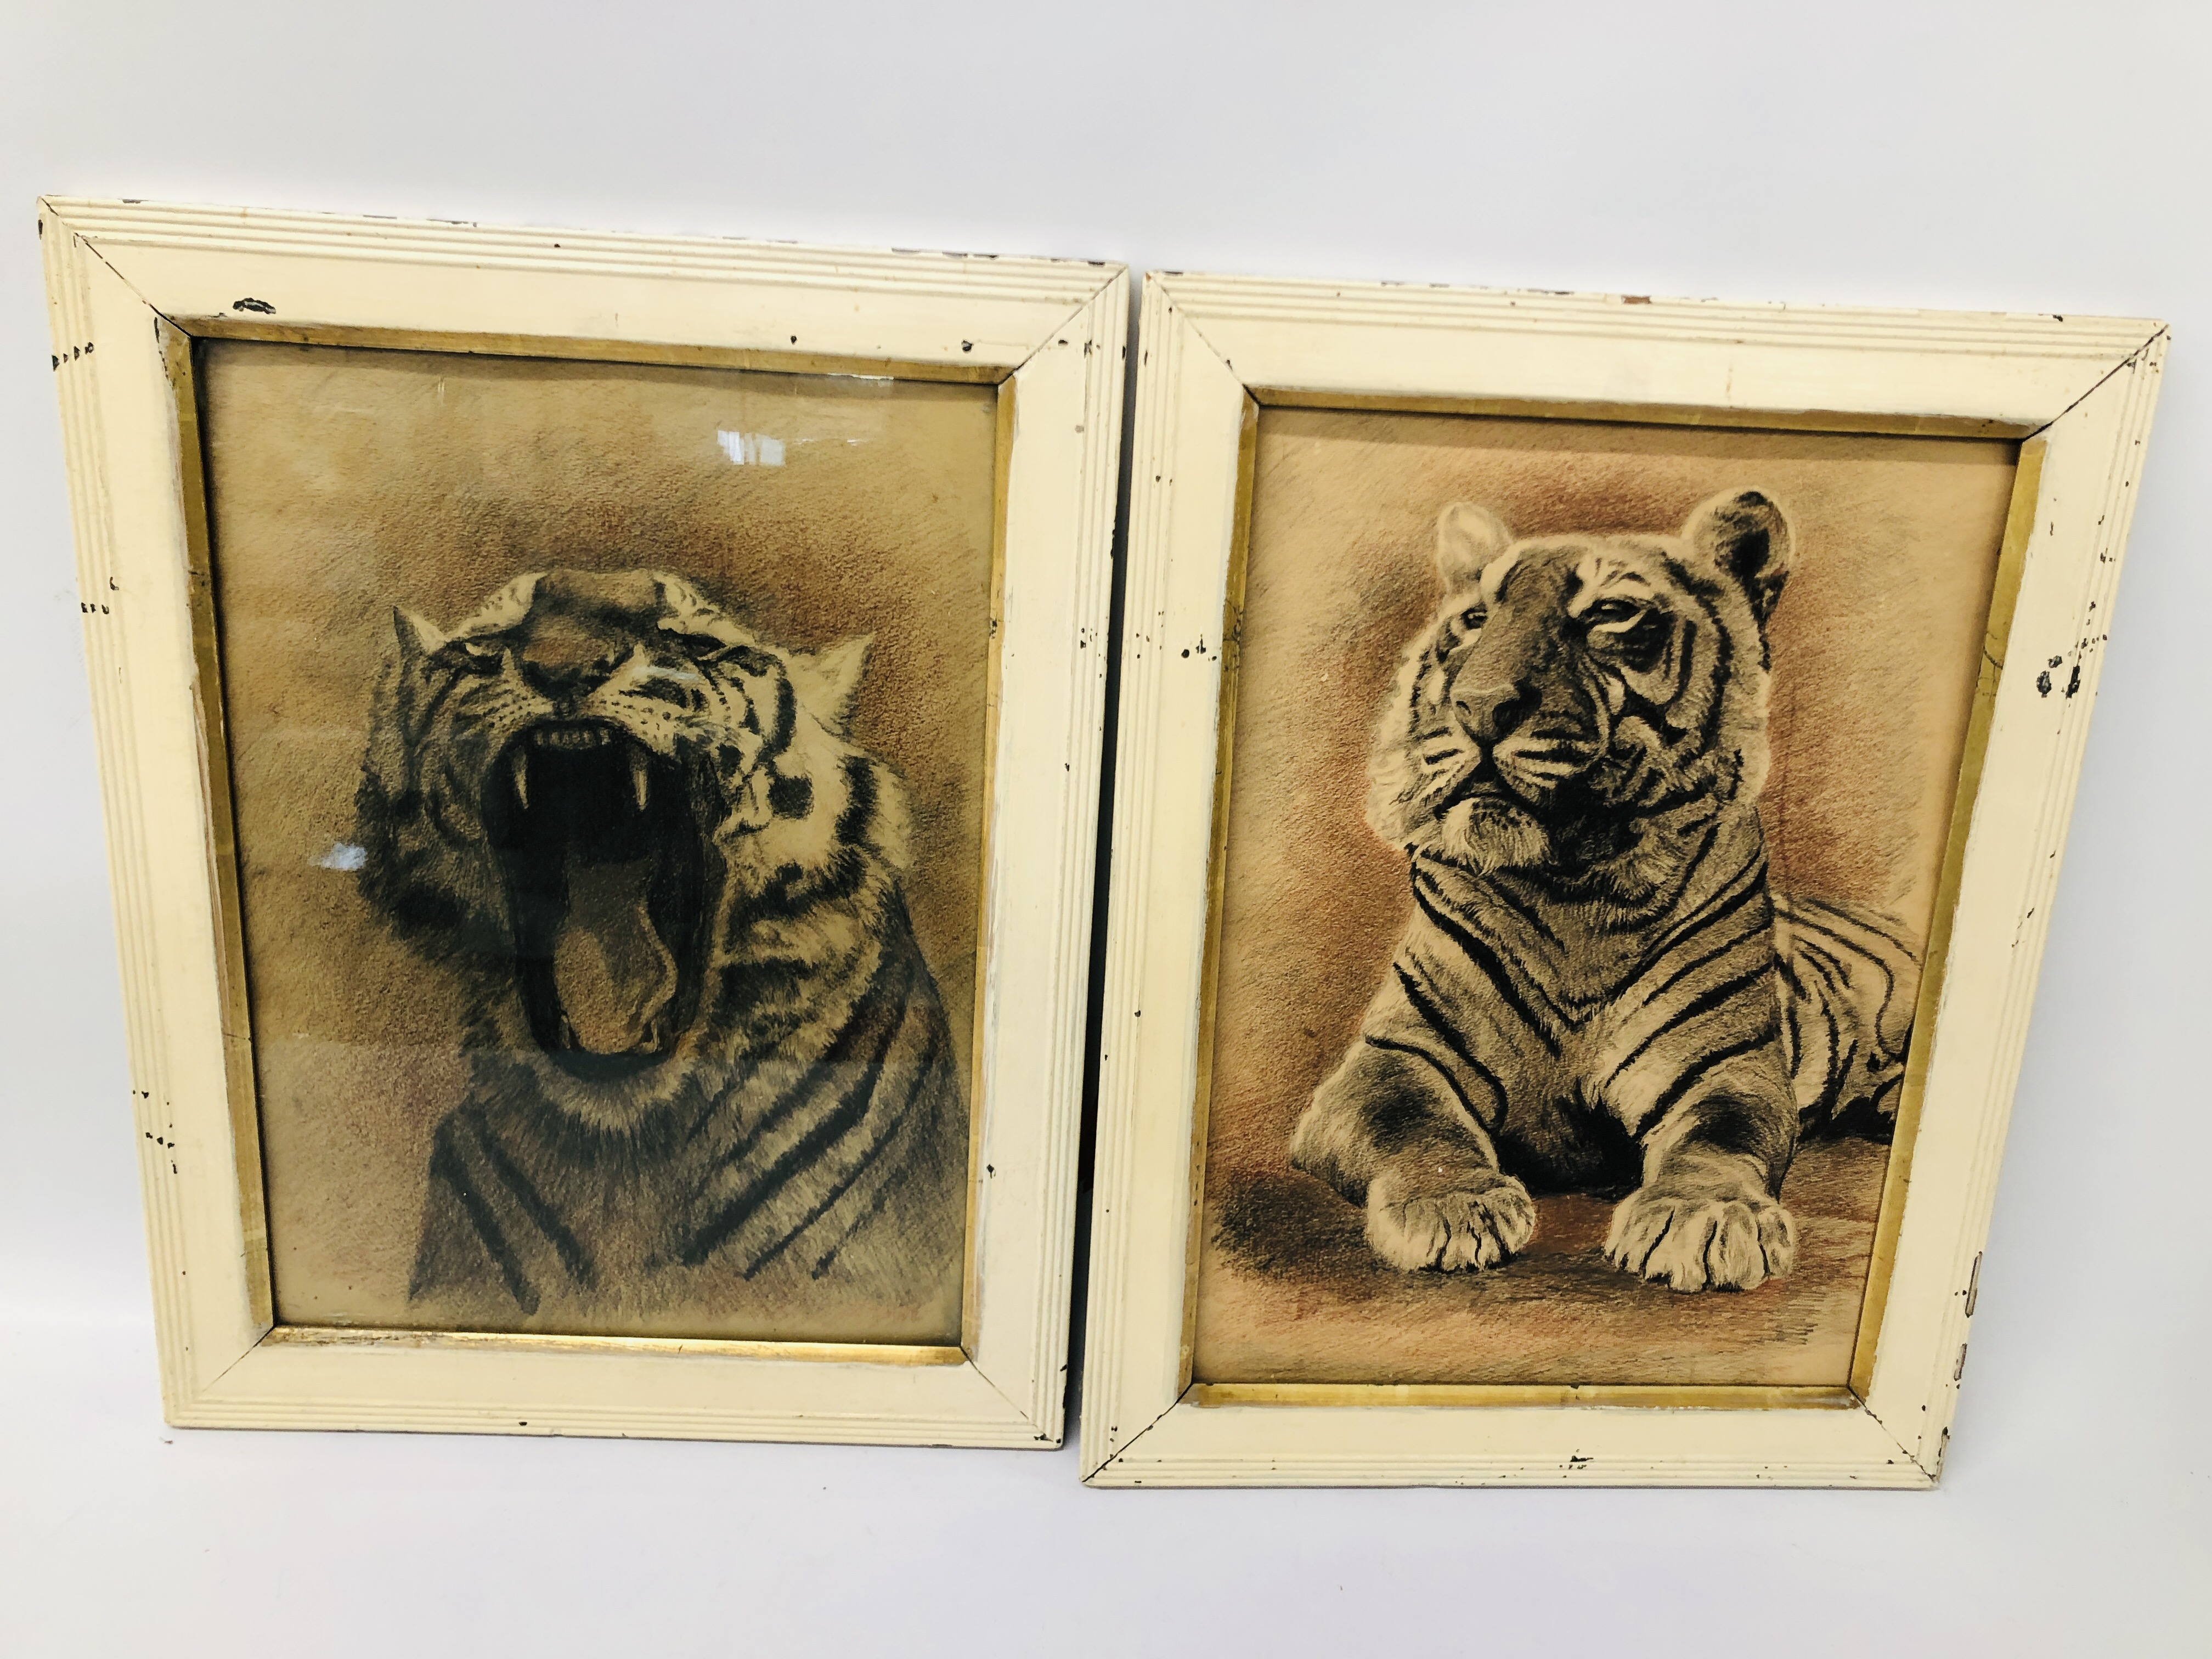 A PAIR OF ORIGINAL CHARCOAL DRAWINGS OF TIGERS, NO VISIBLE SIGNATURE, EACH H 44CM X W 31.5CM.